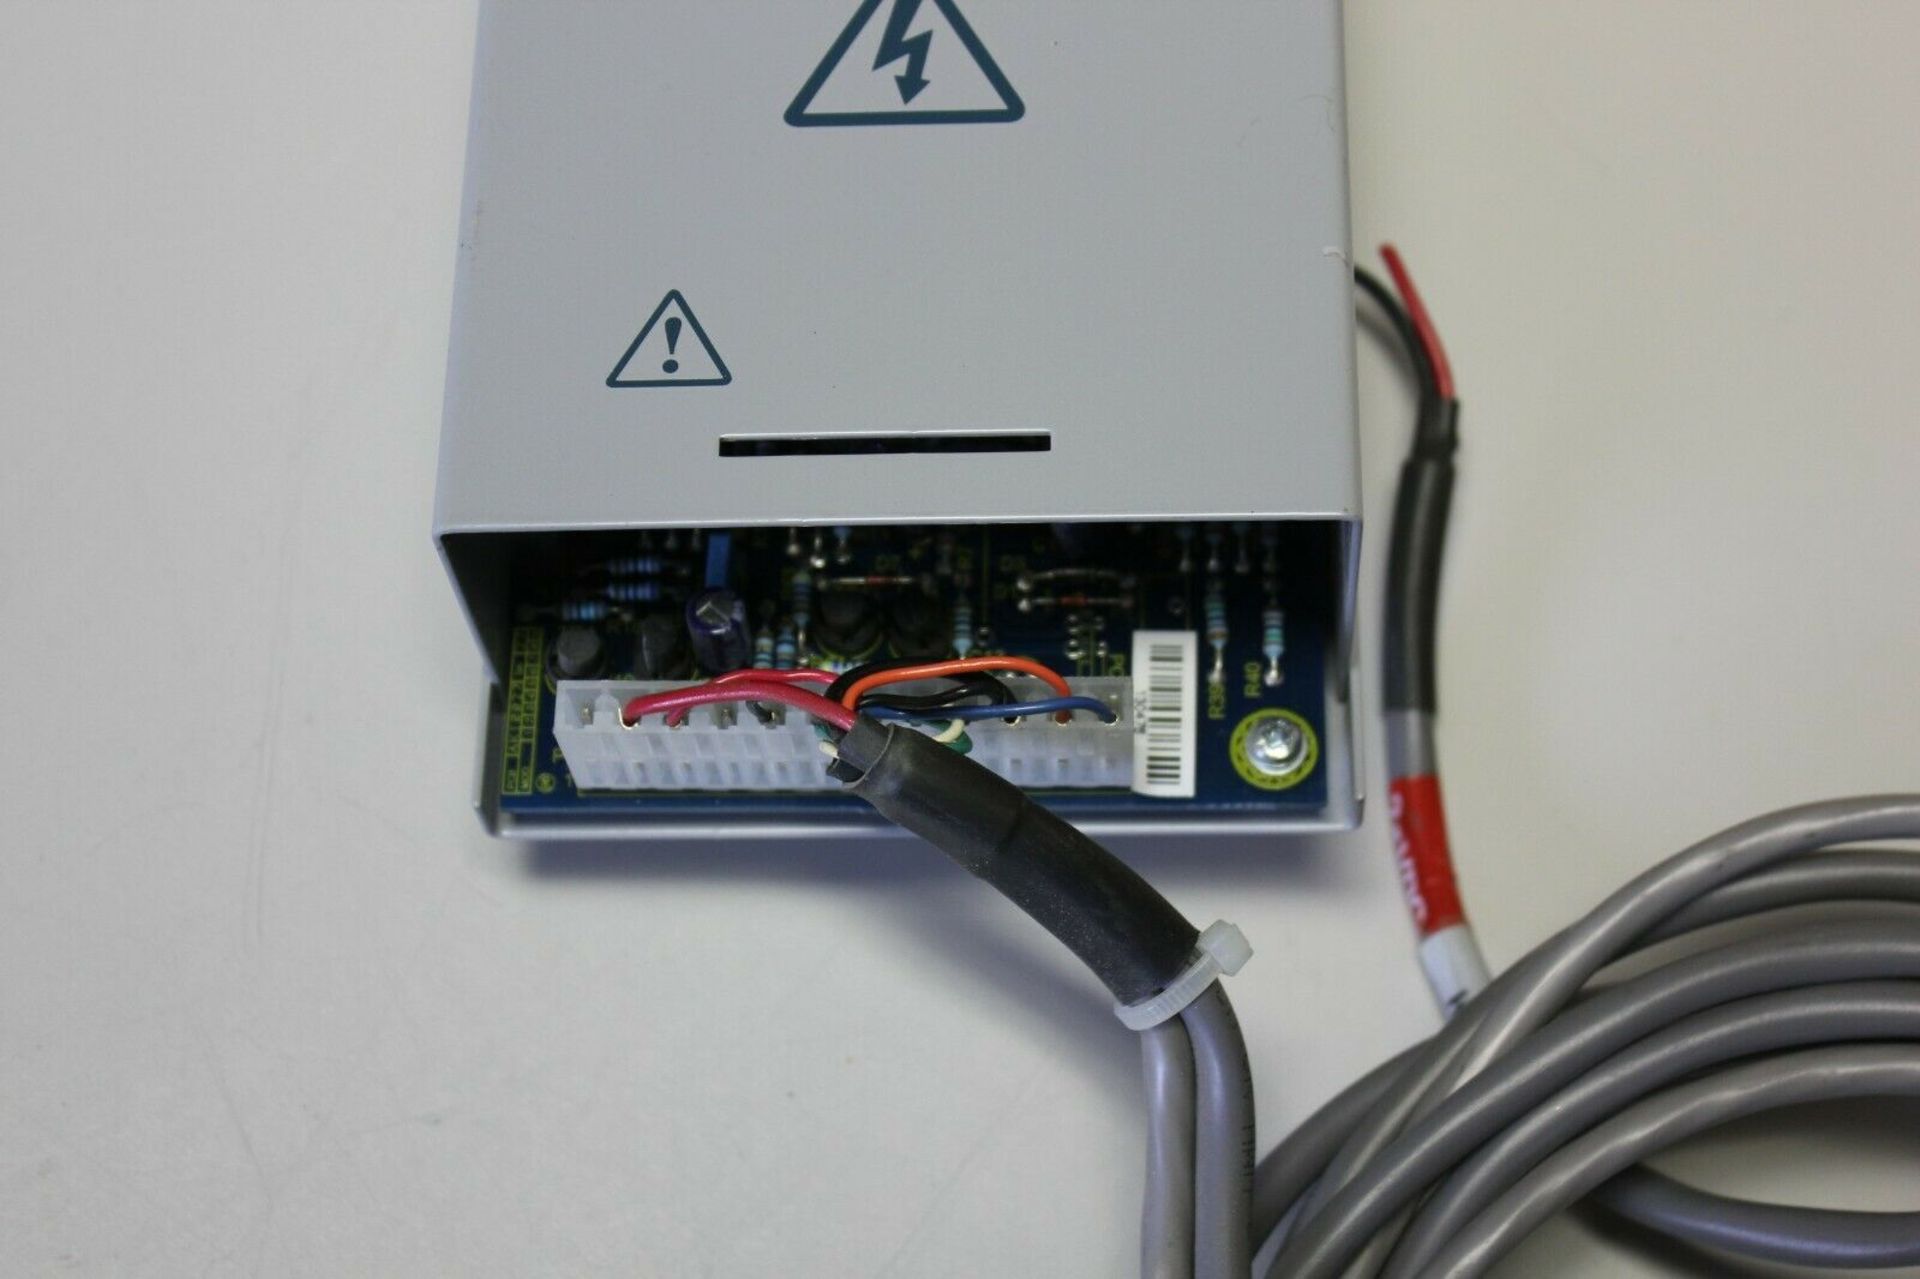 APPLIED KILOVOLTS 24V HIGH VOLTAGE POWER SUPPLY - Image 2 of 4